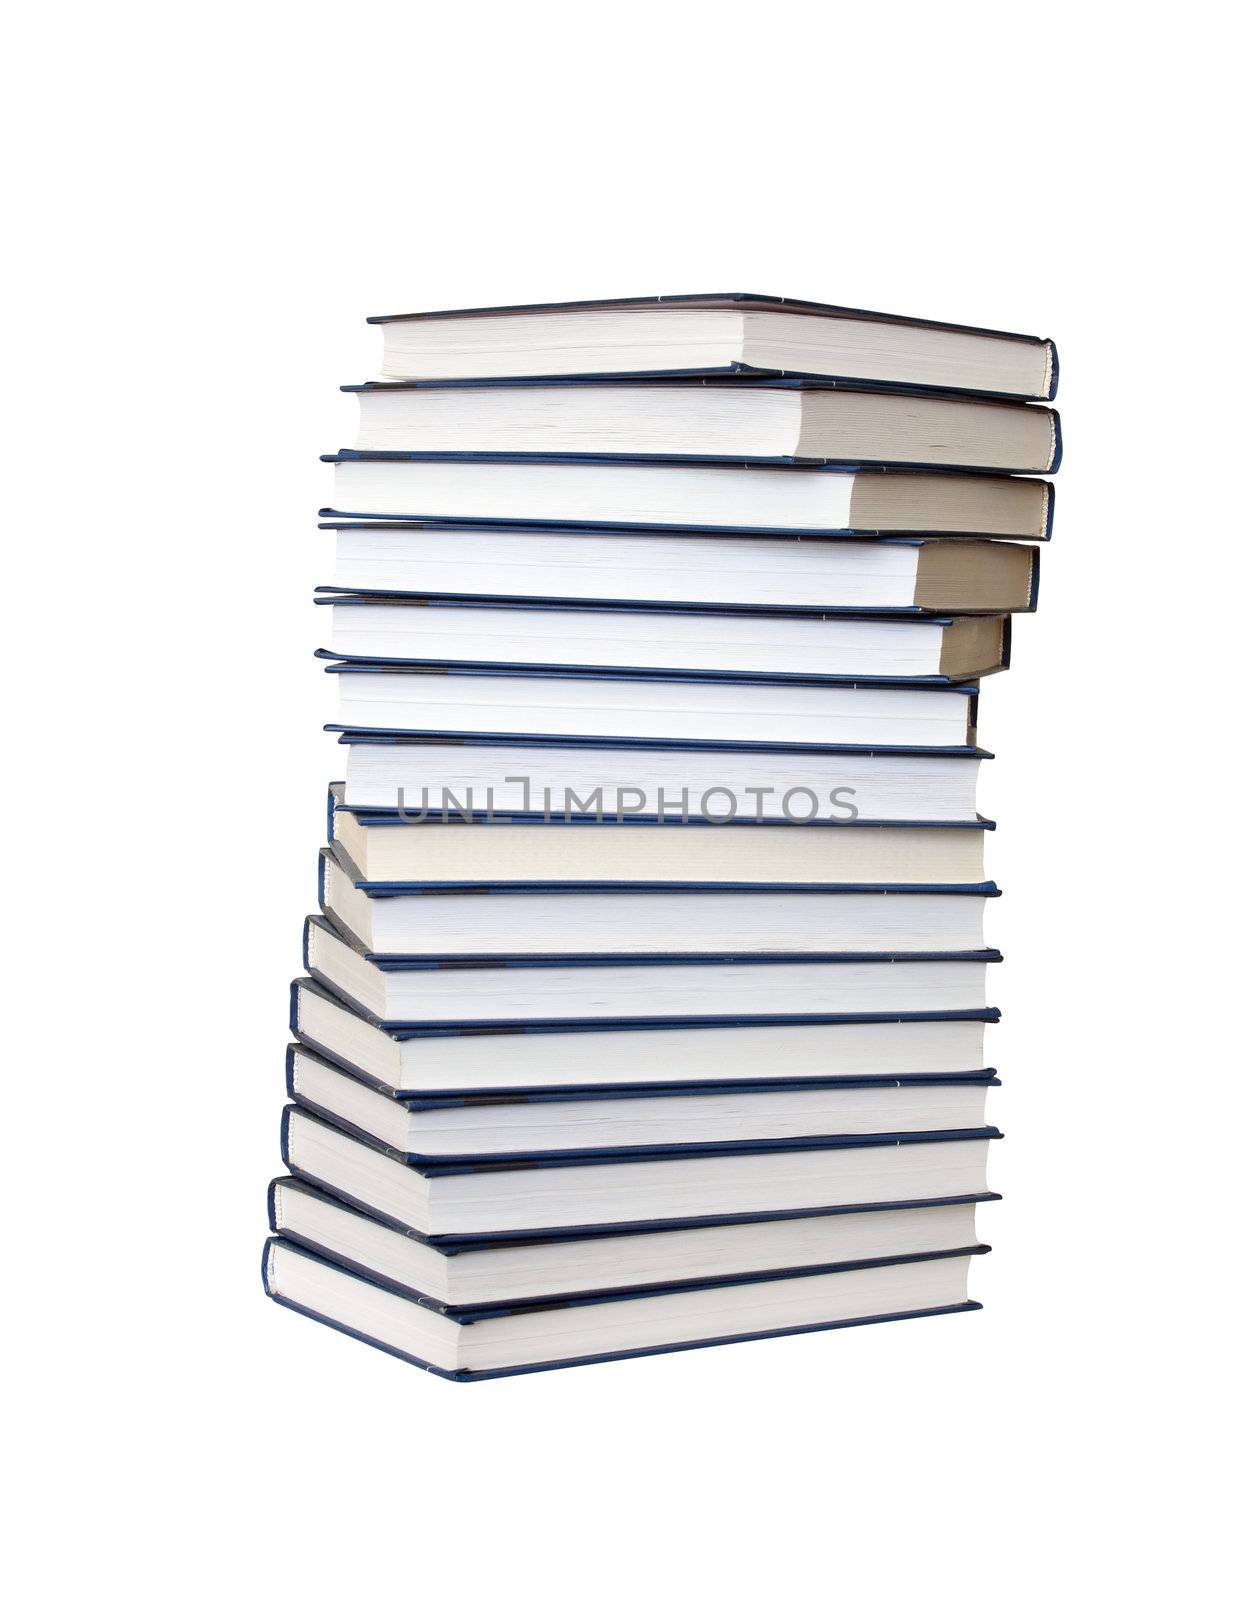 High stack of books isolated on white background with clipping path